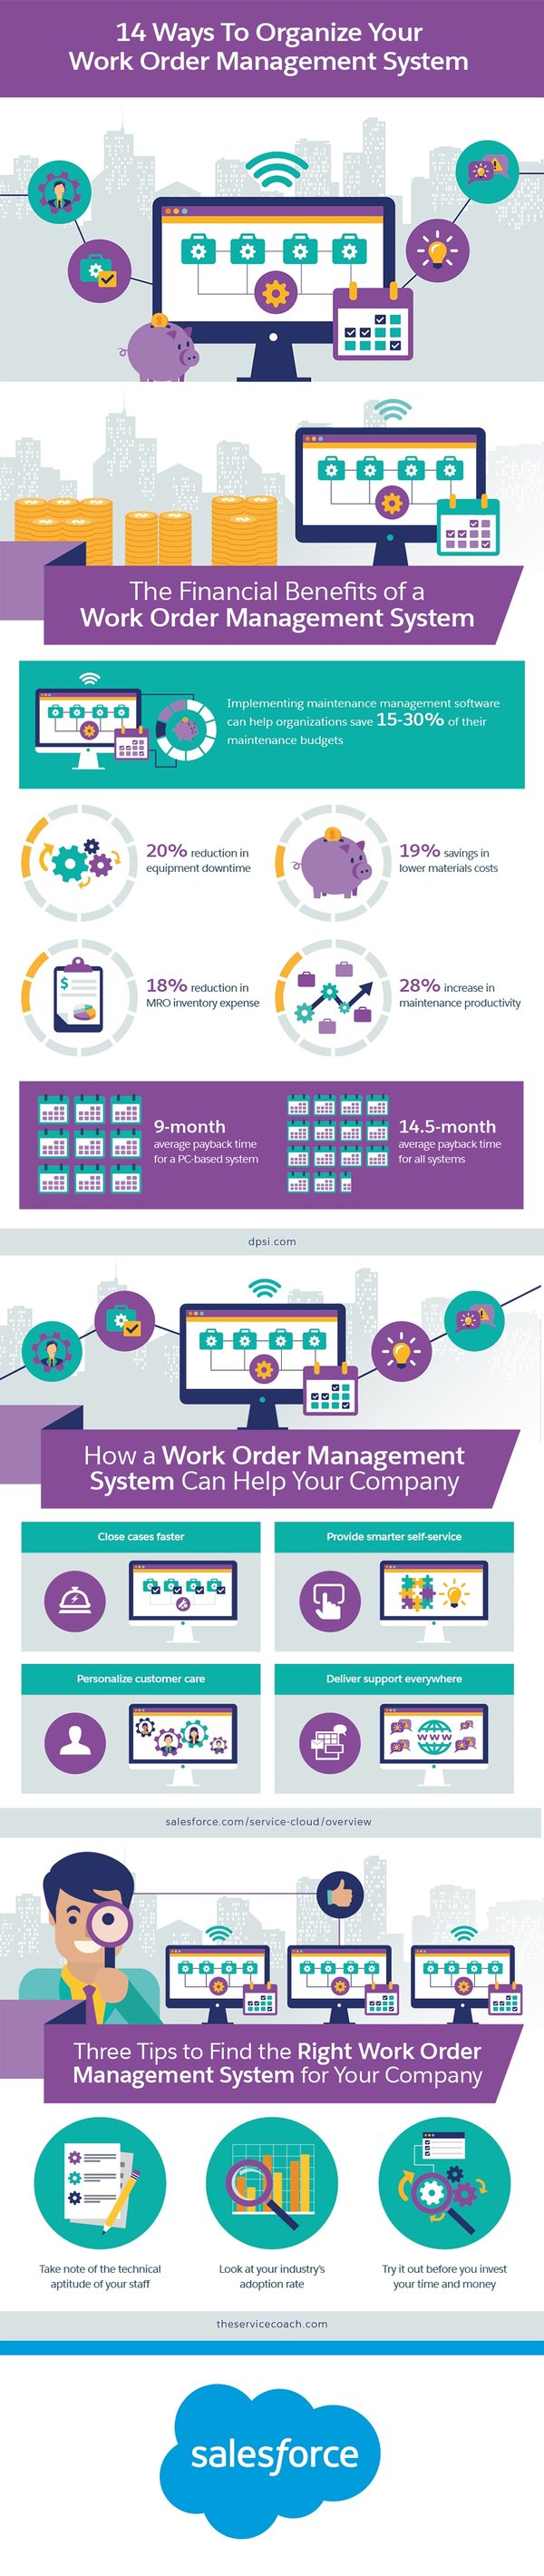 14 Ways To Organize Your Work Order Management System Infographic